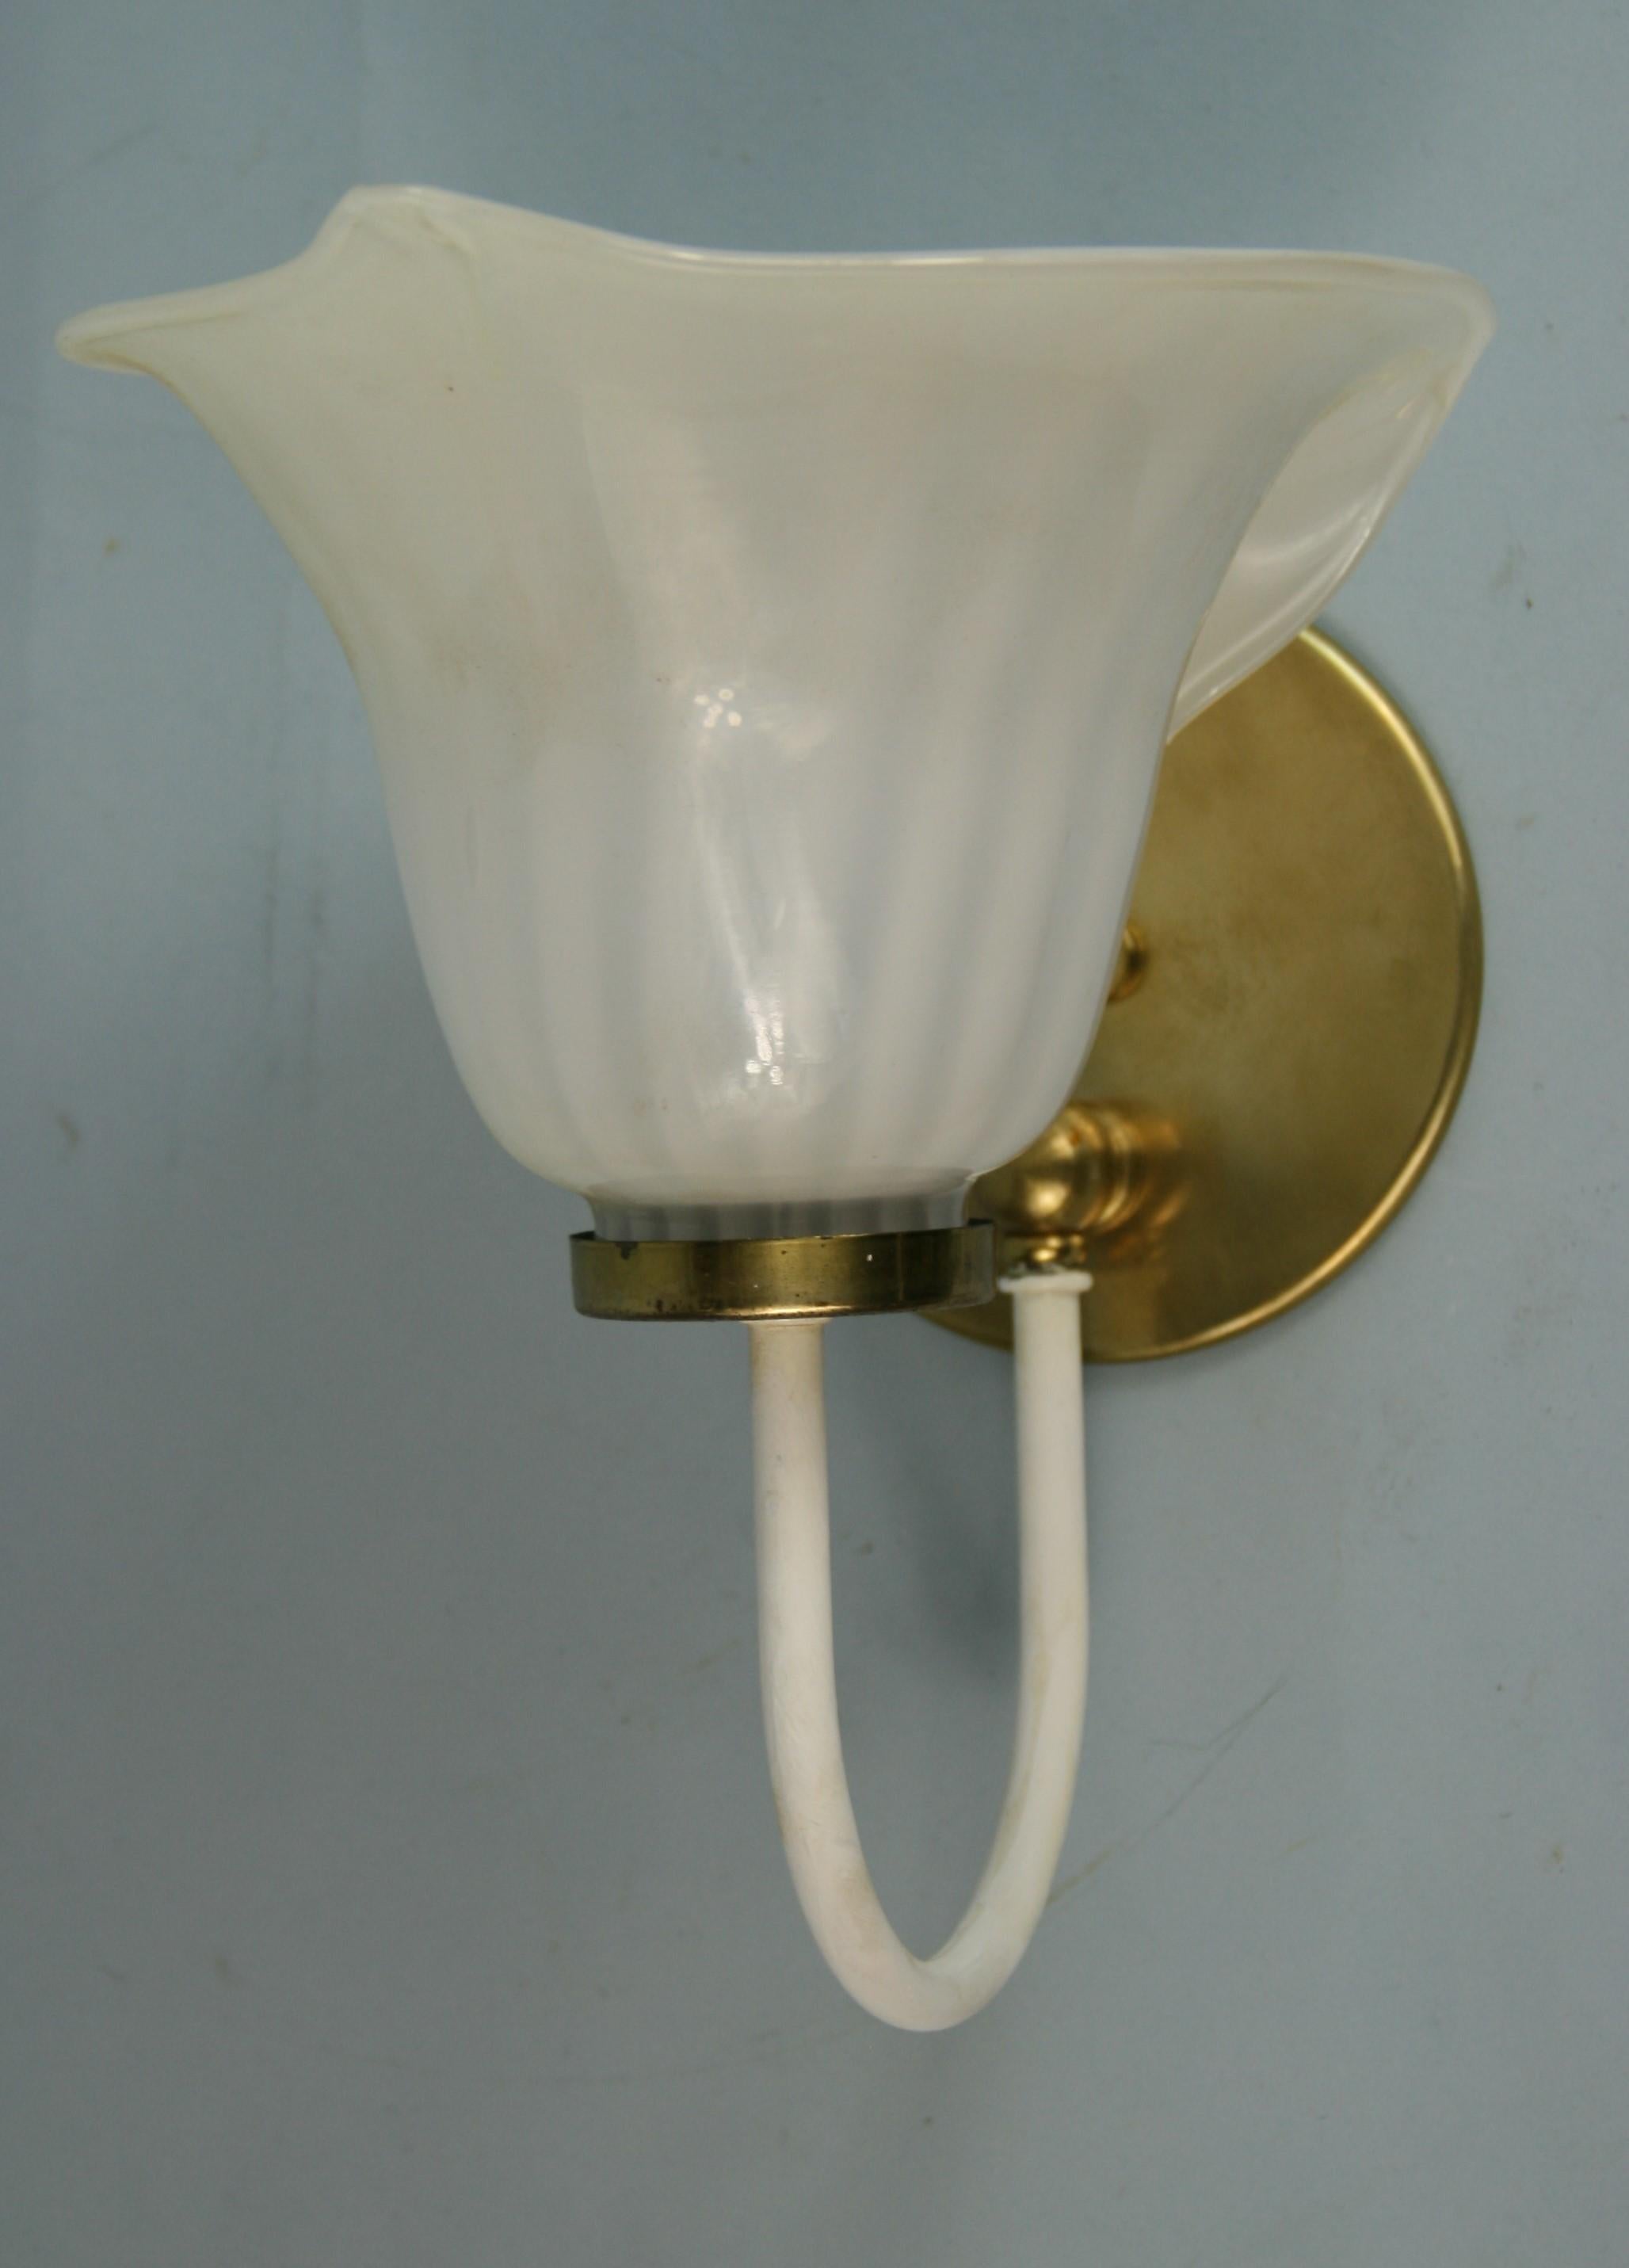 3-590 pair of Murano tulip glass sconces with brass backplate
Rewired
Take one 60 watt candelabra based bulb.